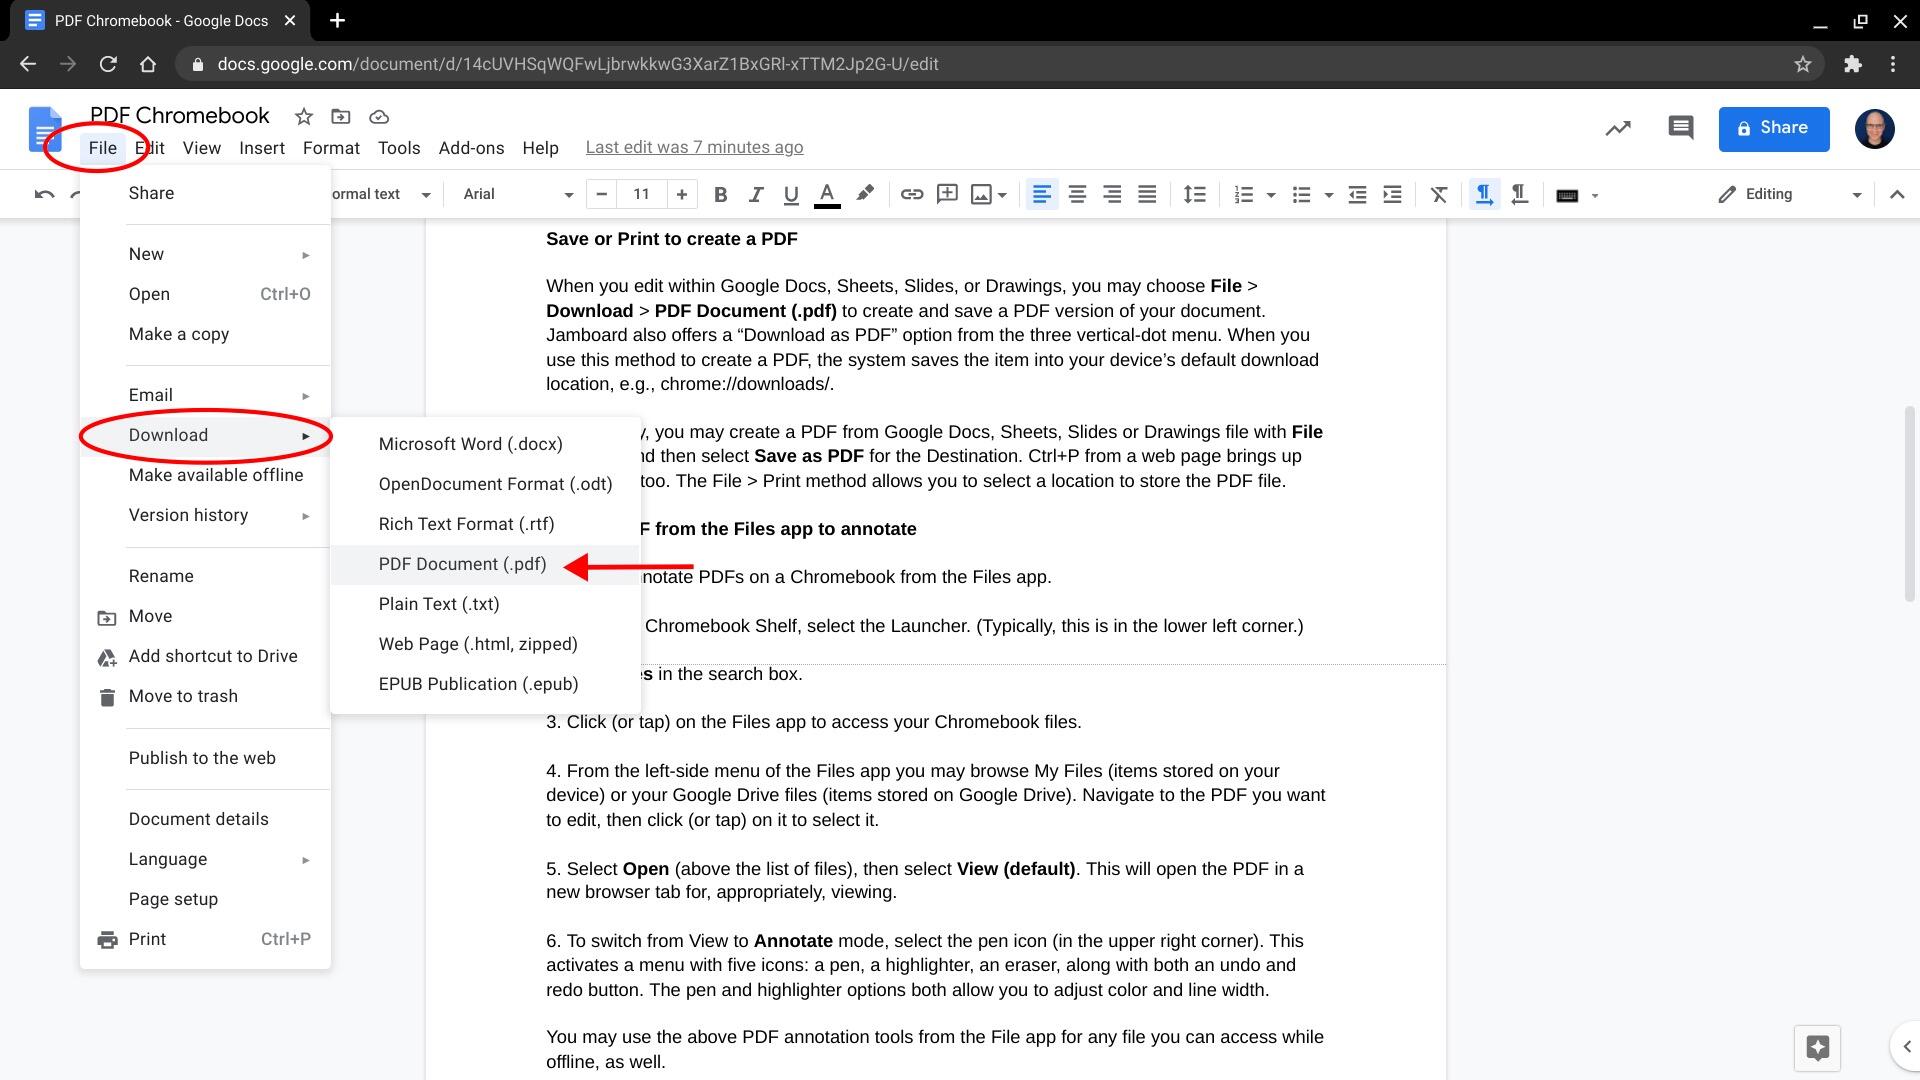 How to work with PDF files on a Chromebook - TechRepublic